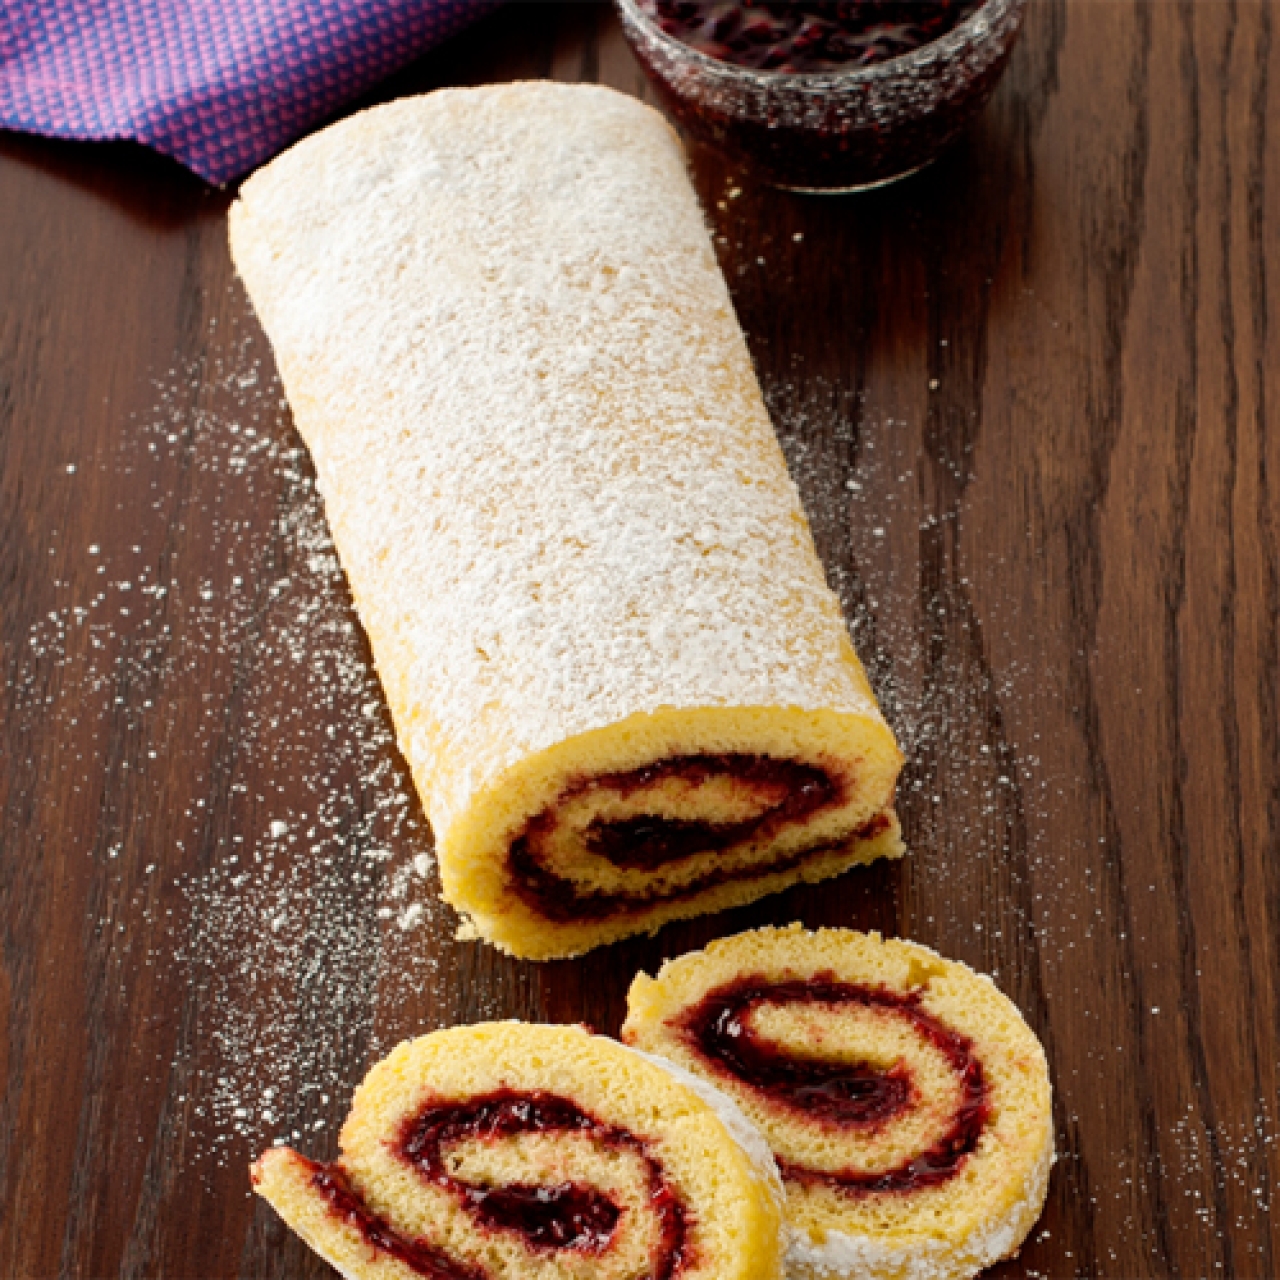 Nordic Ware Jelly Roll Pan 28 x 46 cm